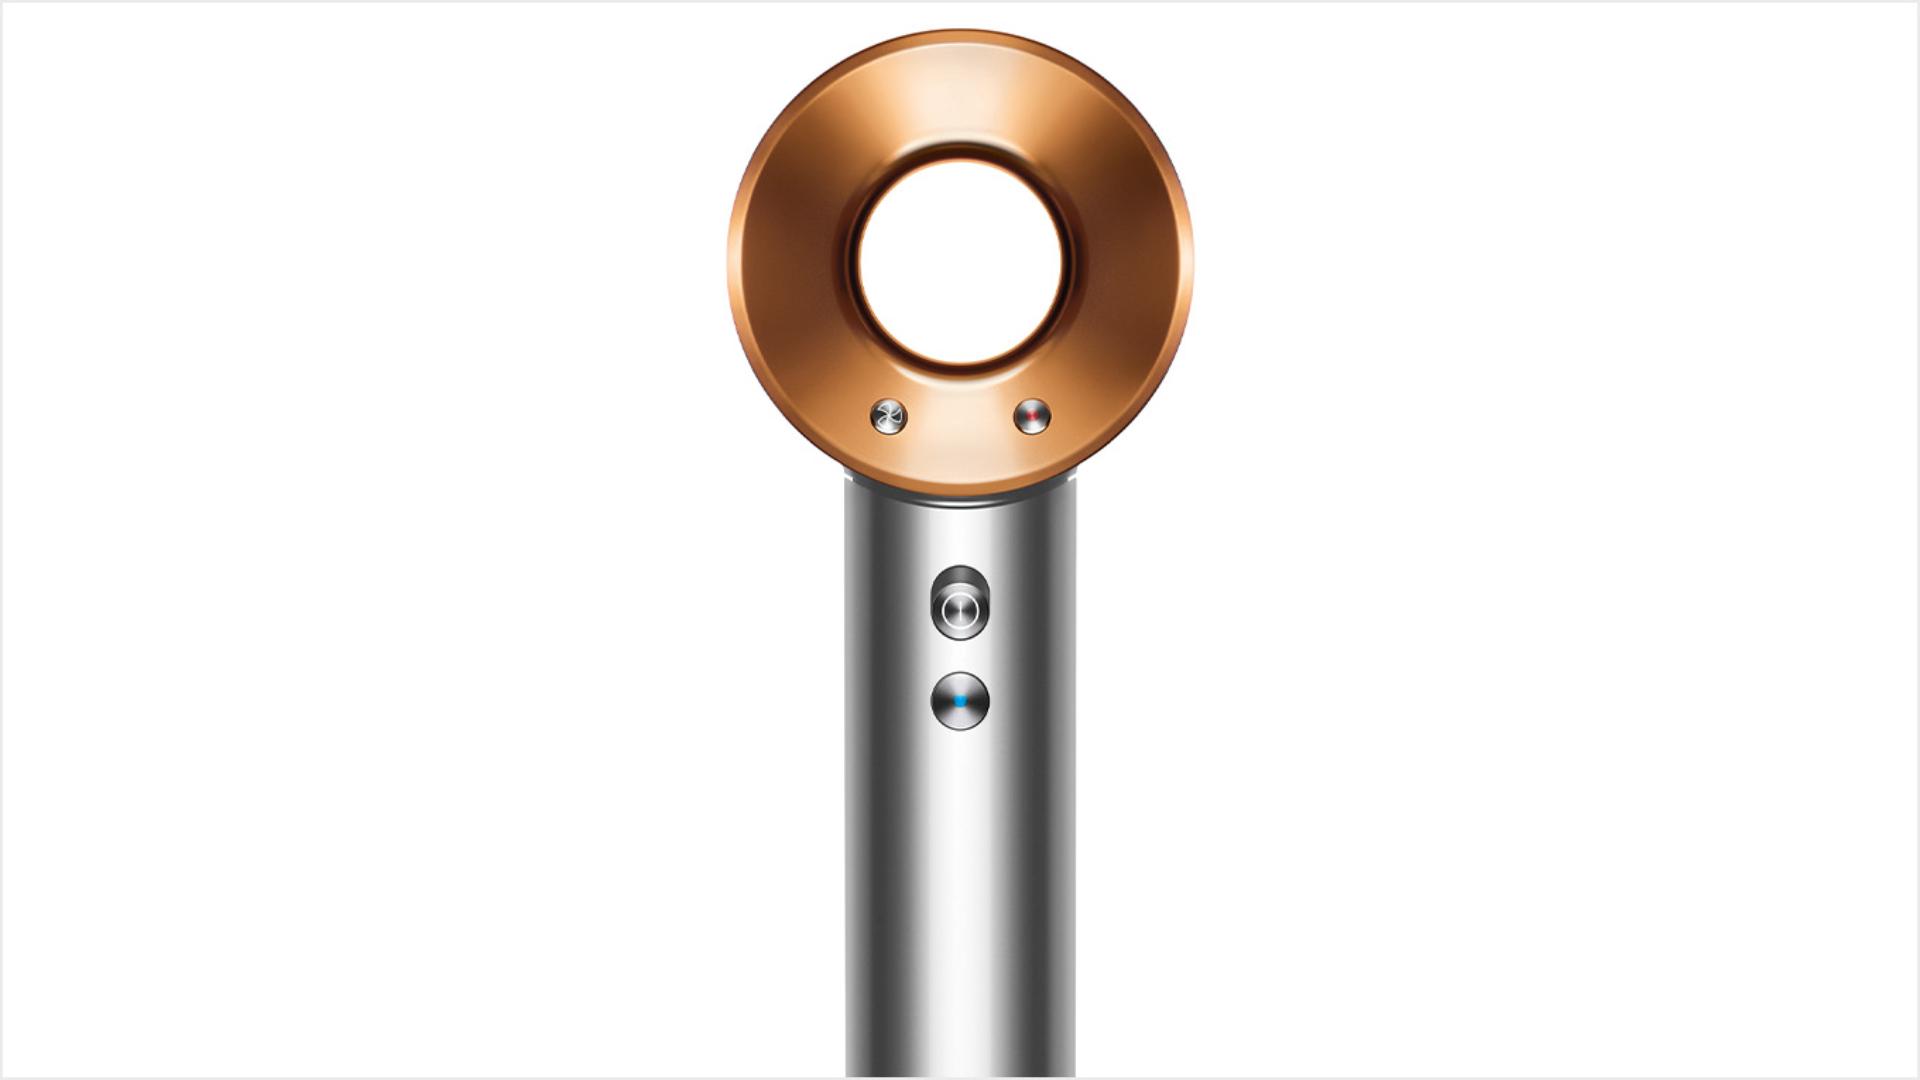 The Dyson Supersonic hair dryer in Nickel Copper